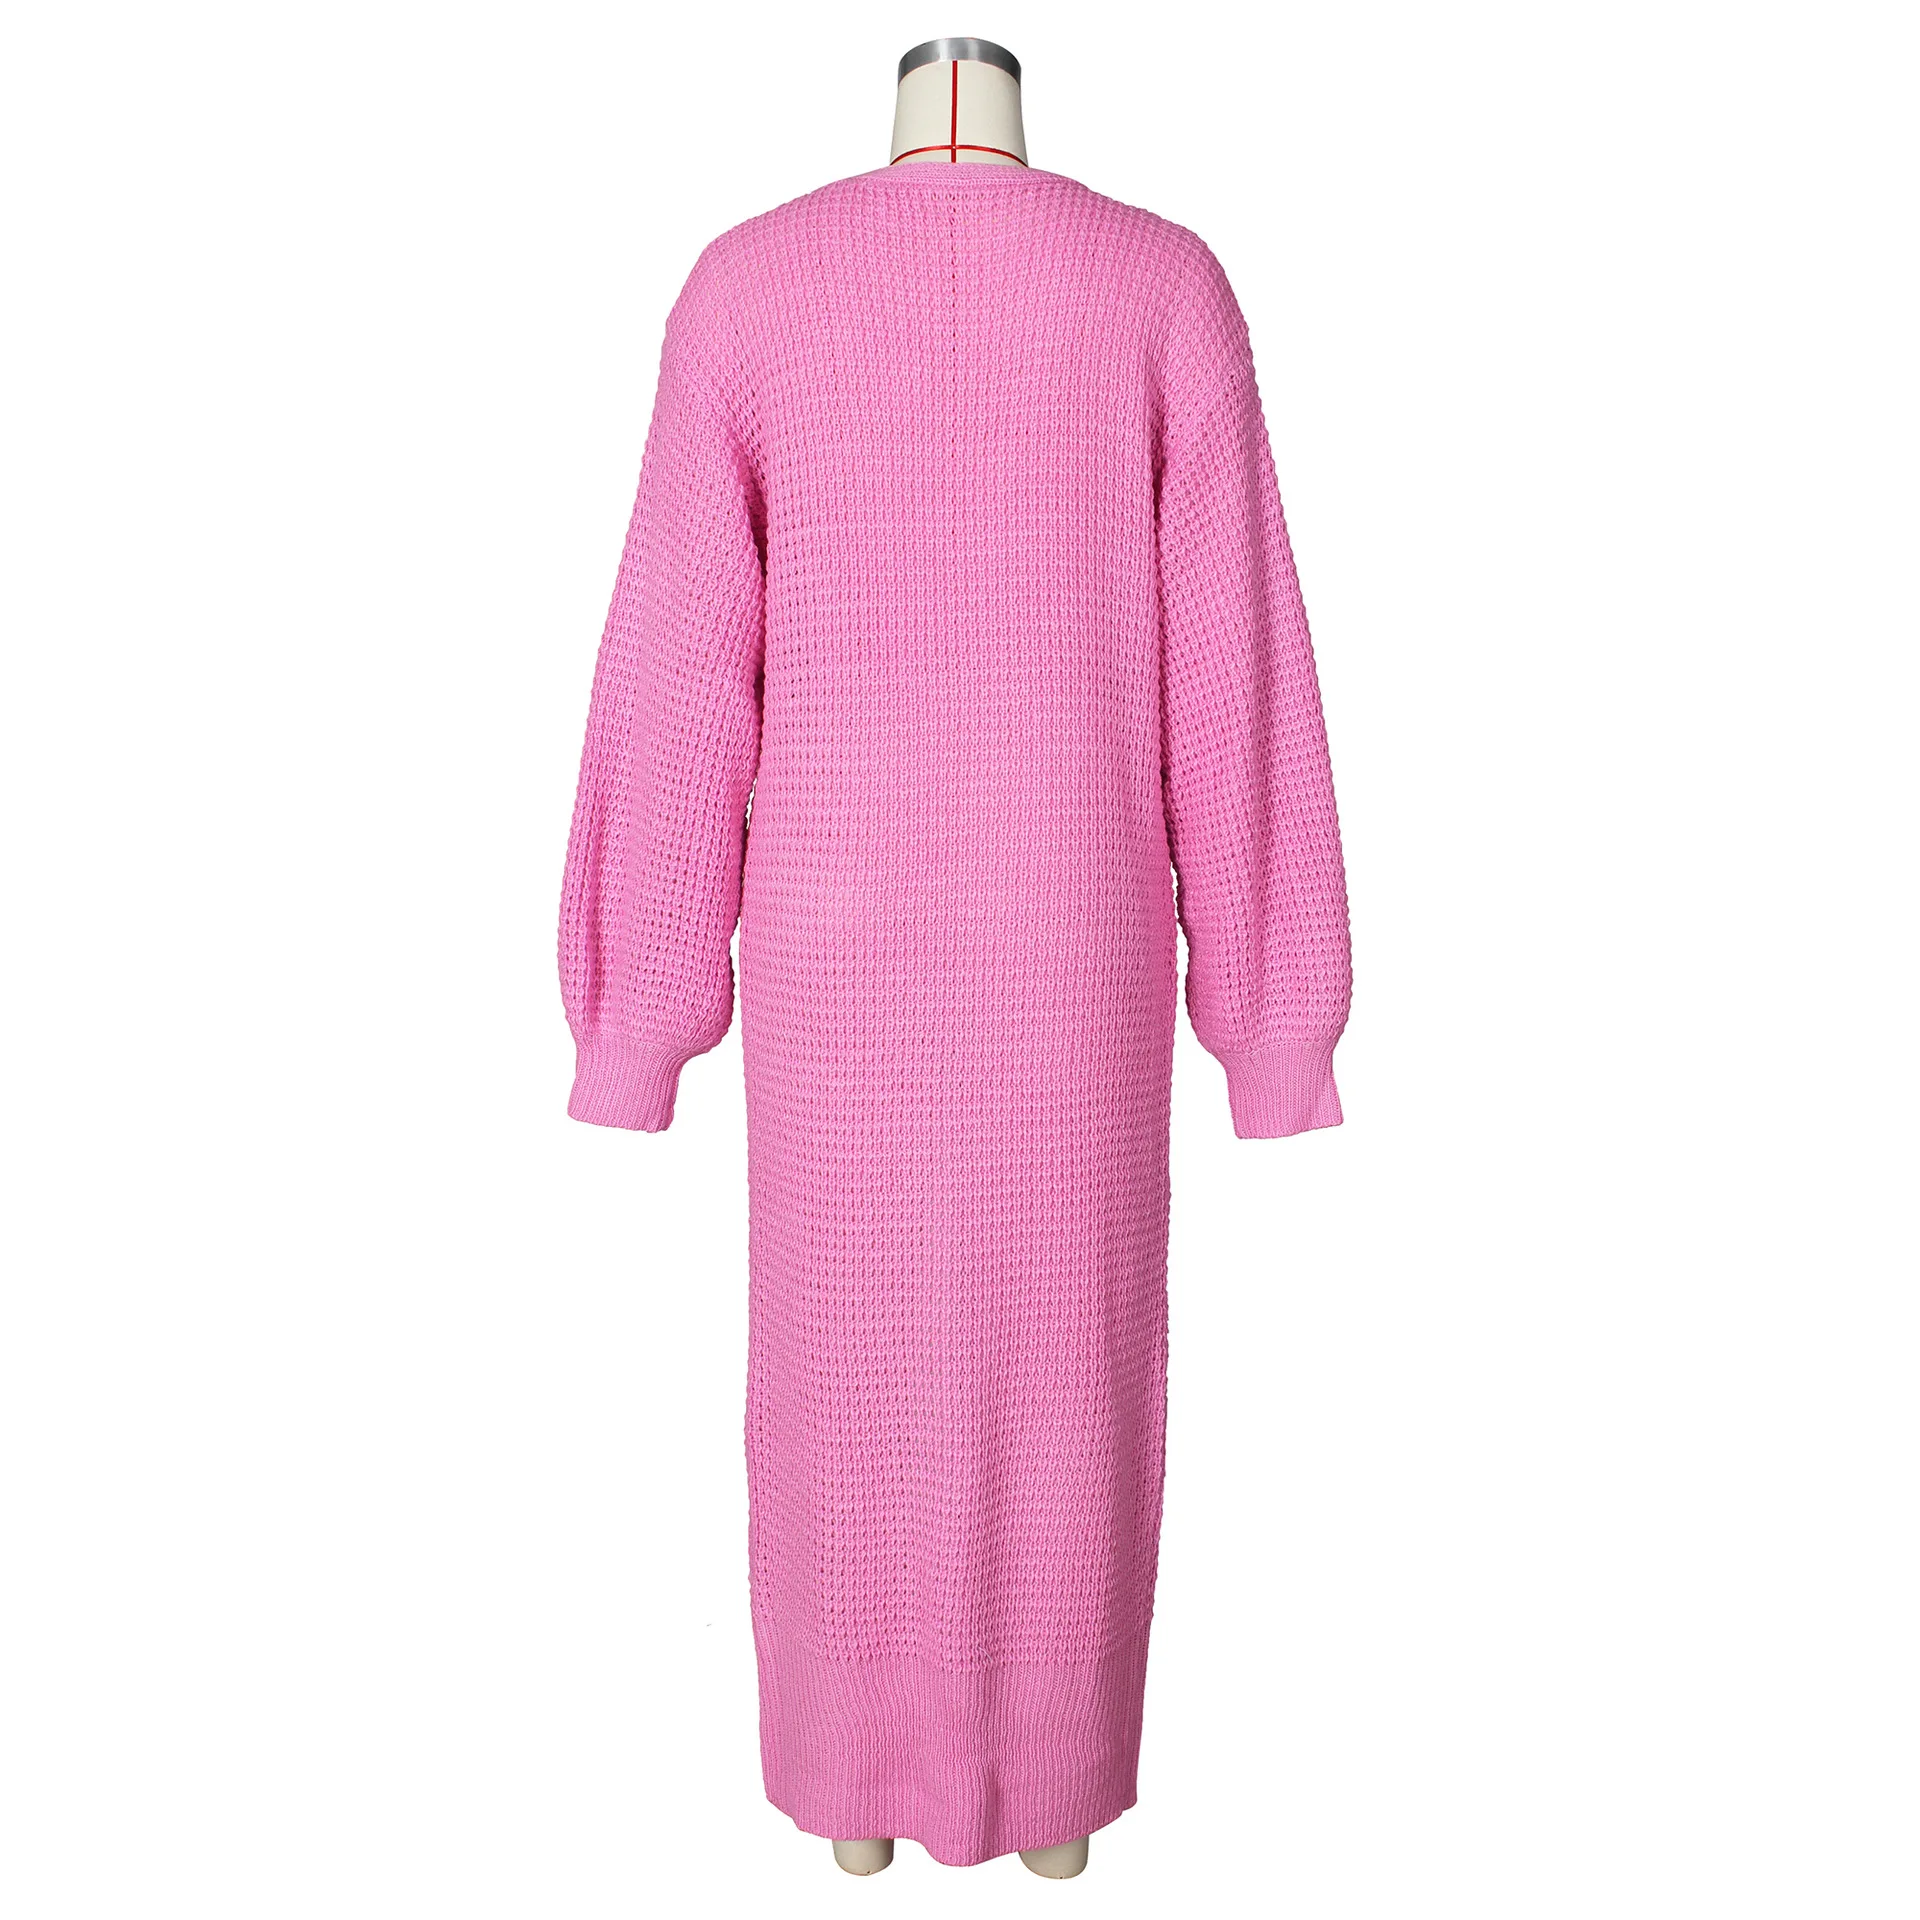 ANJAMANOR Solid Knitted Oversized Long Cardigan Sweaters for Women Fashion Casual Coat Pink White Outwear Dropshipping D48-FA56 images - 6